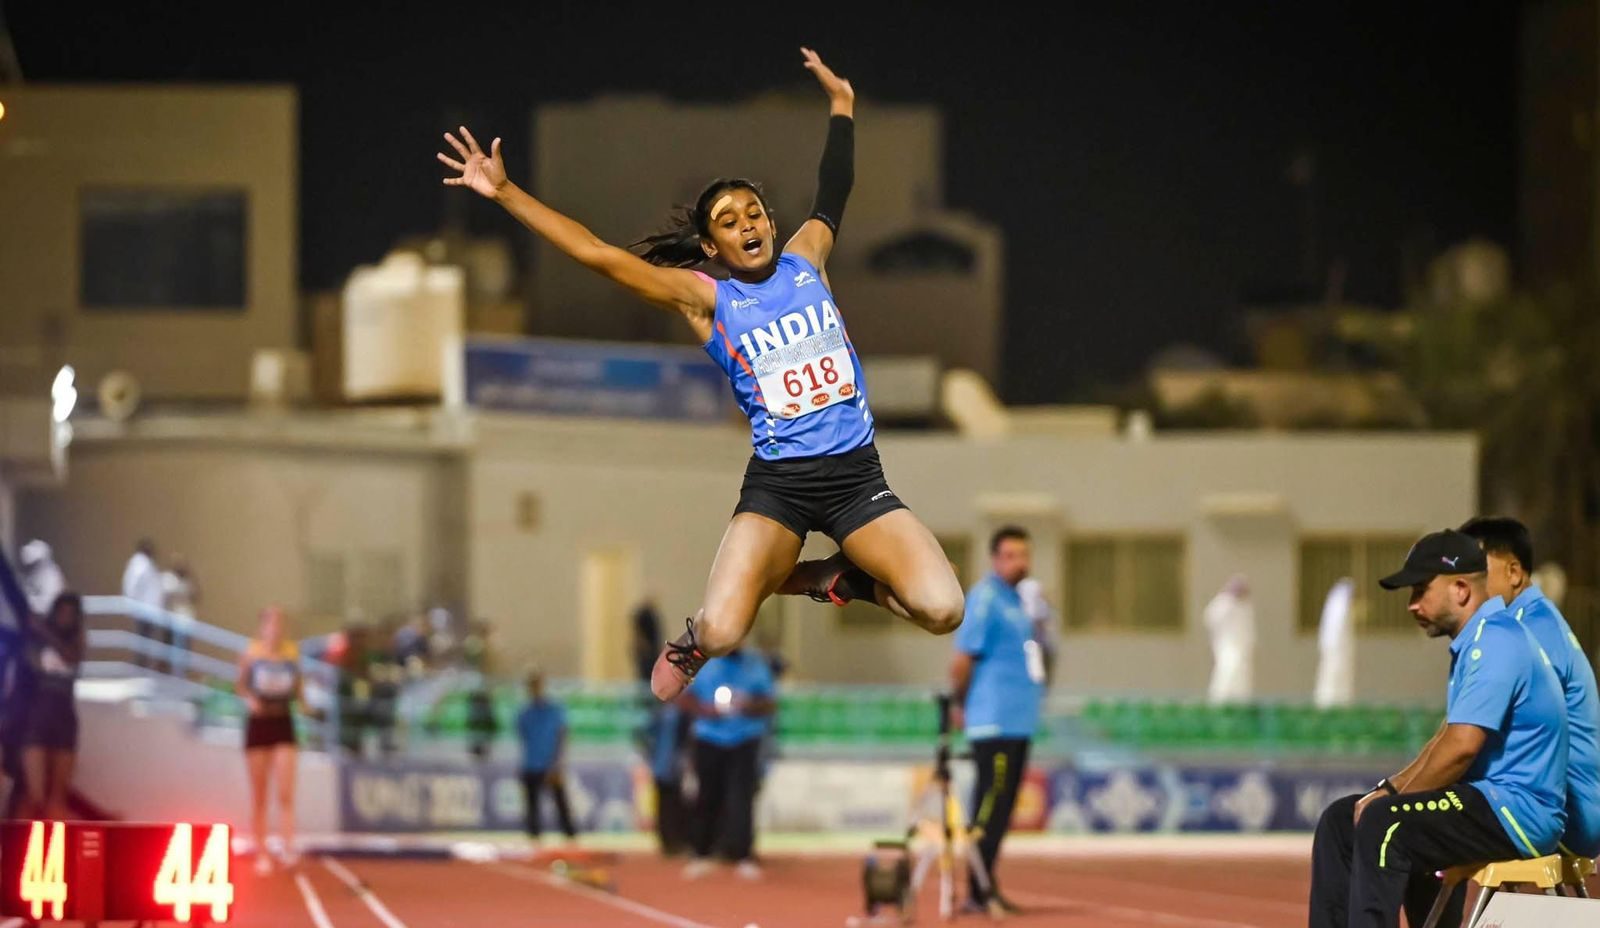 Meet Mubssina Mohammed, first athlete from Lakshadweep to win international medal for India